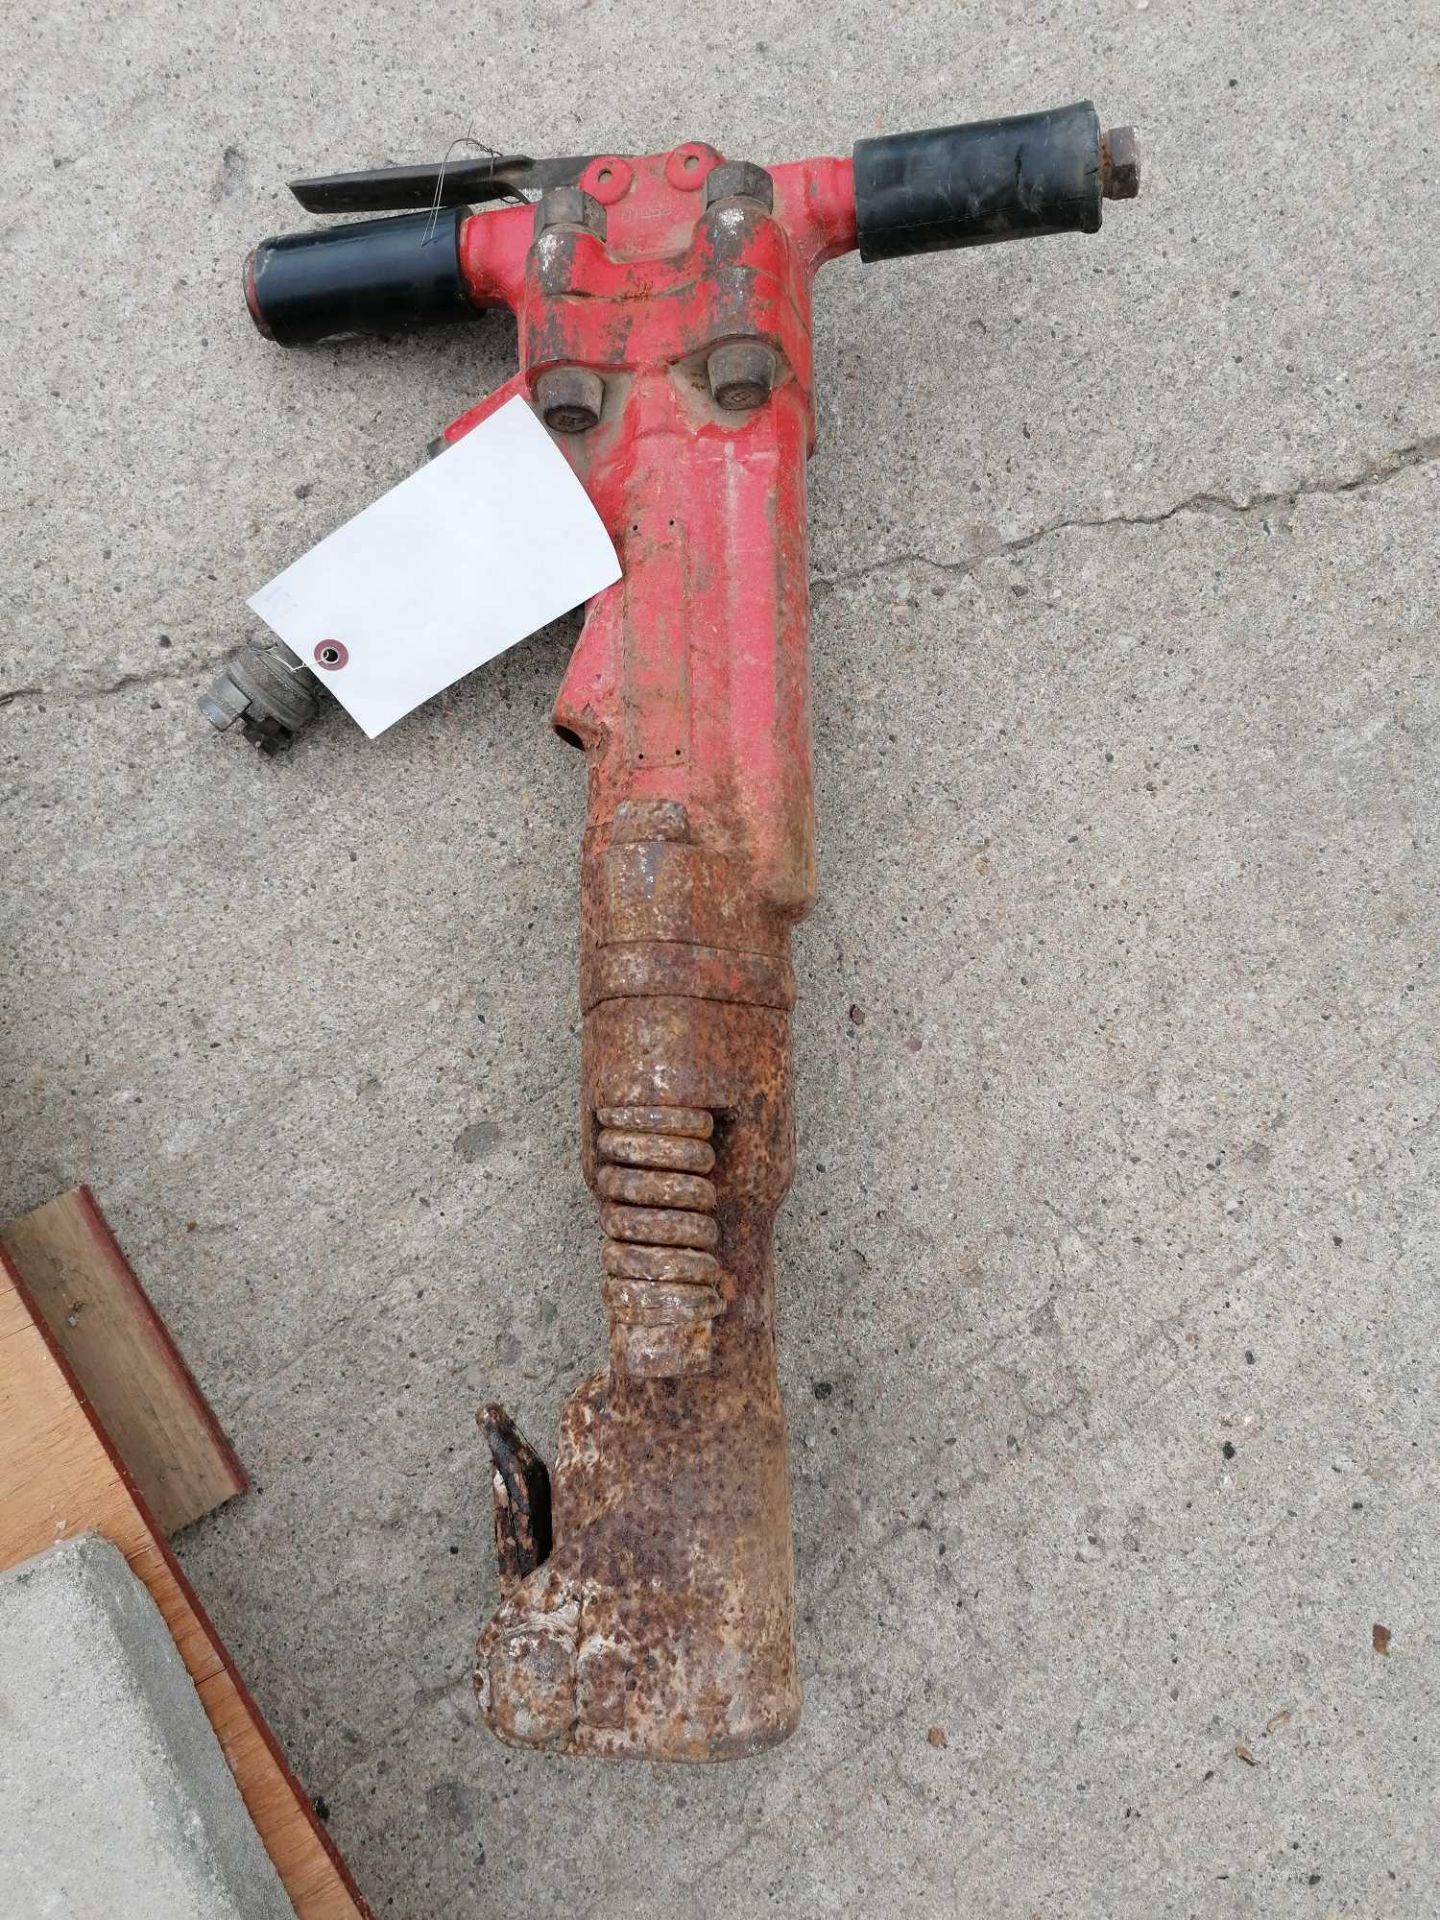 Pneumatic Air Jack Hammer, Located at 301 E Henry Street, Mt. Pleasant, IA - Image 2 of 2